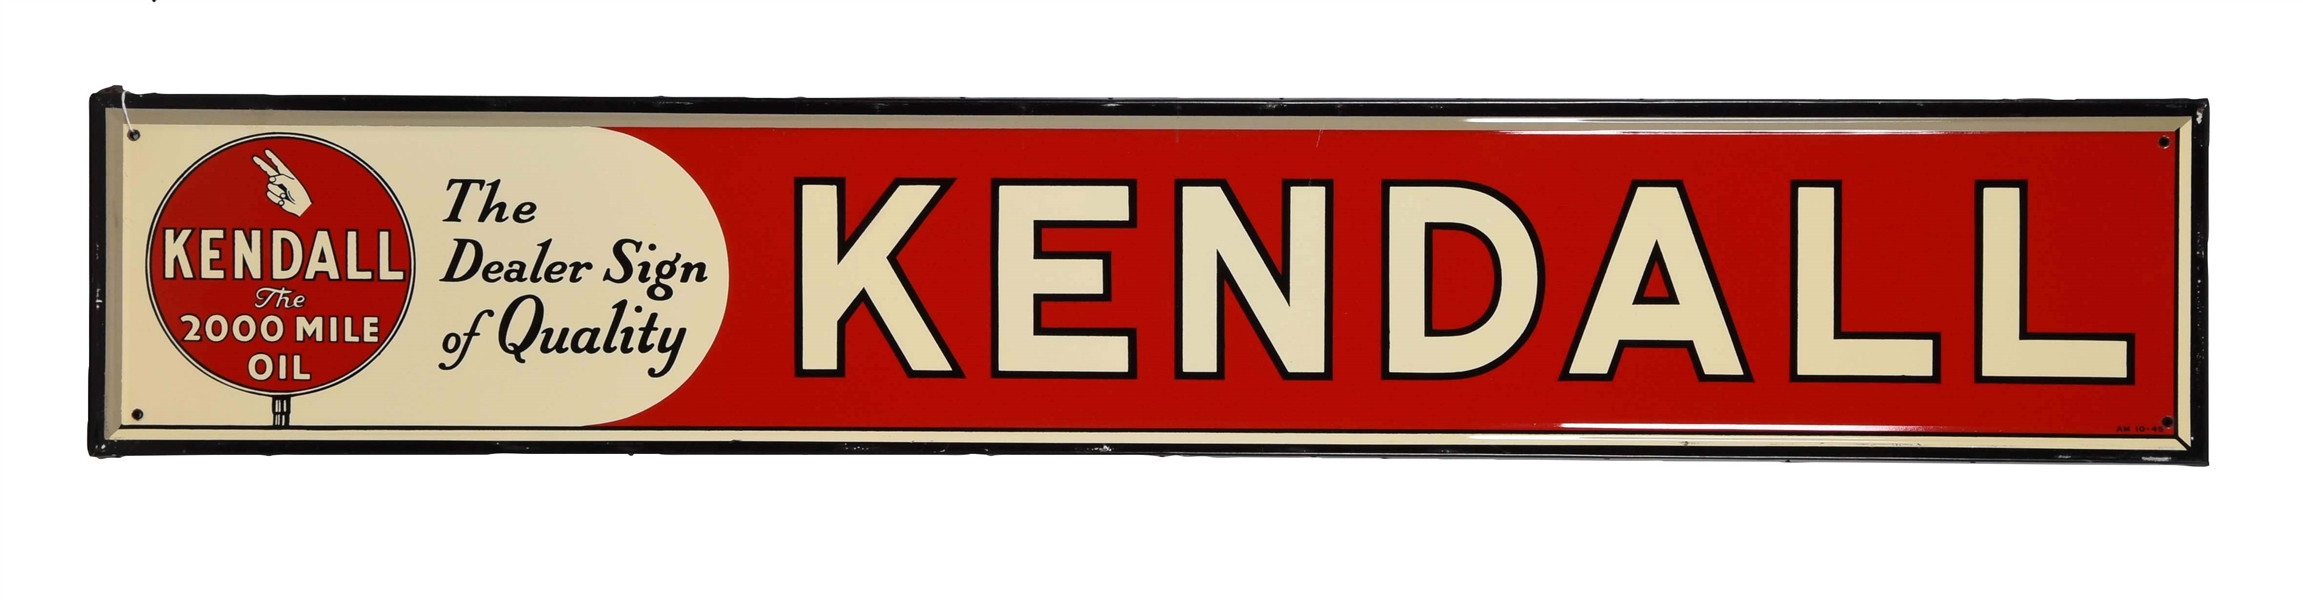 KENDALL "THE 2000 MILE OIL" EMBOSSED TIN SIGN.